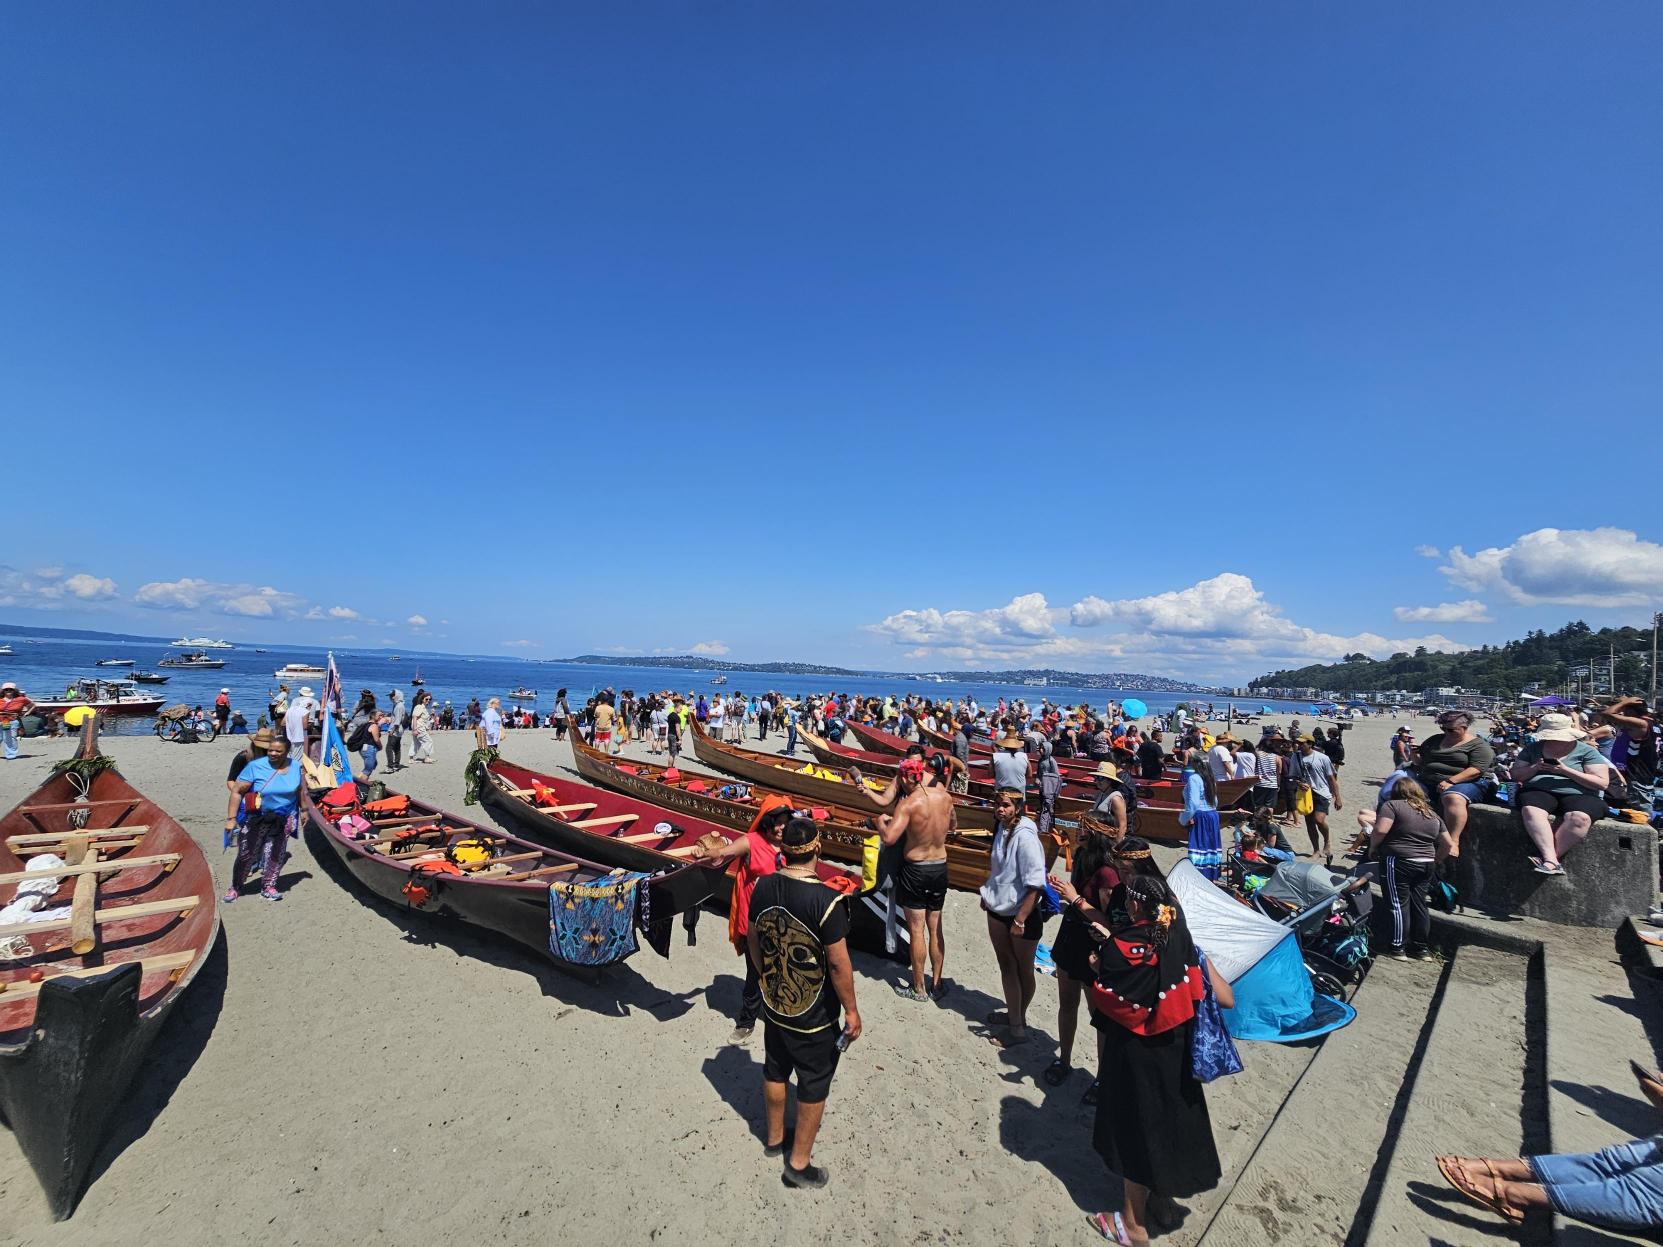 The canoes were brought up the sandy beach, where they laid safely as their passengers rested and ate in the hot sun. // CREDIT: Tracci Dial, NWPB